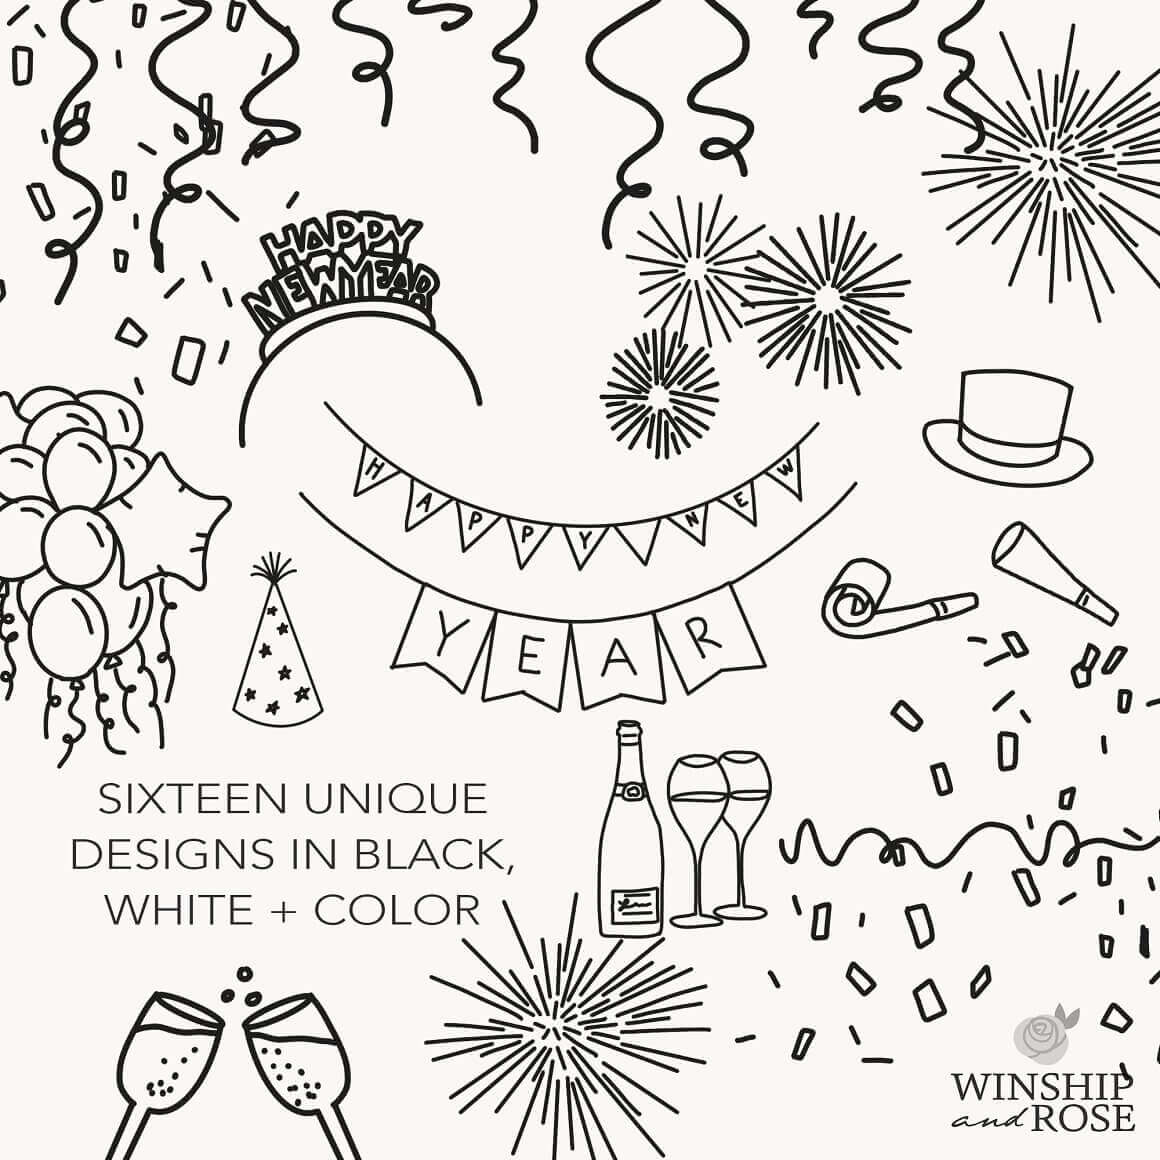 Sixteen unique designs in black and white colors.